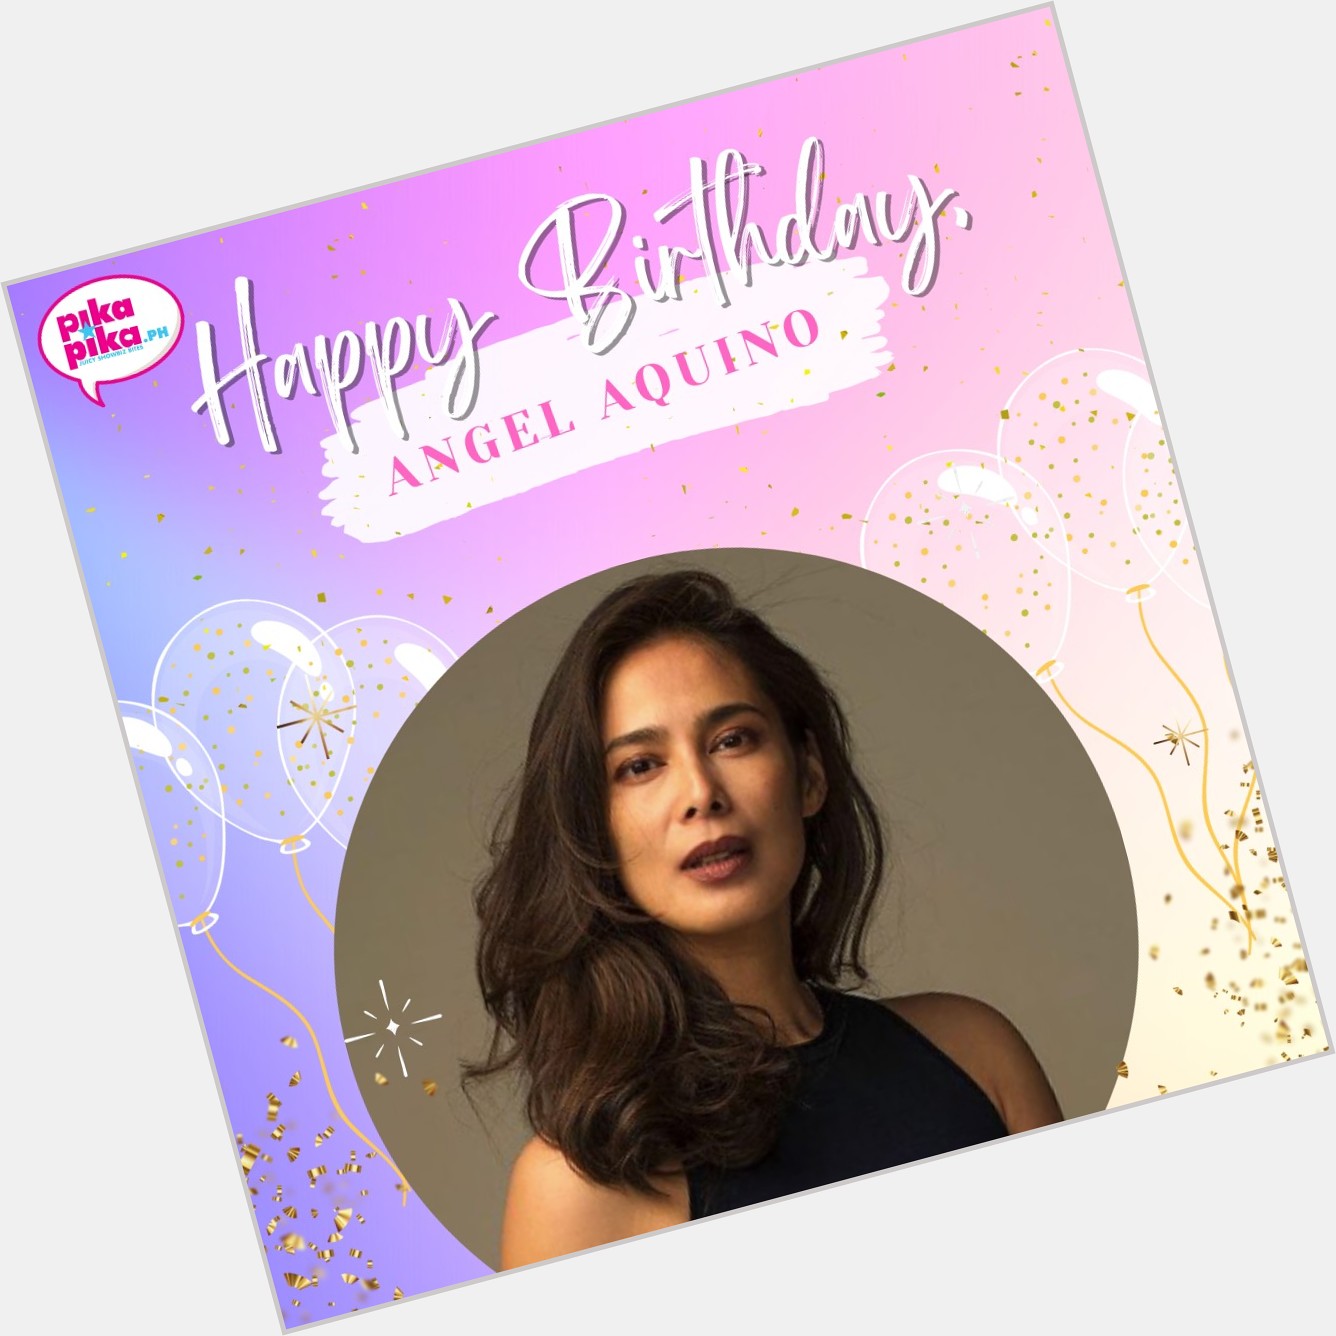 Happy birthday, Angel Aquino! May your special day be filled with love and cheers.    